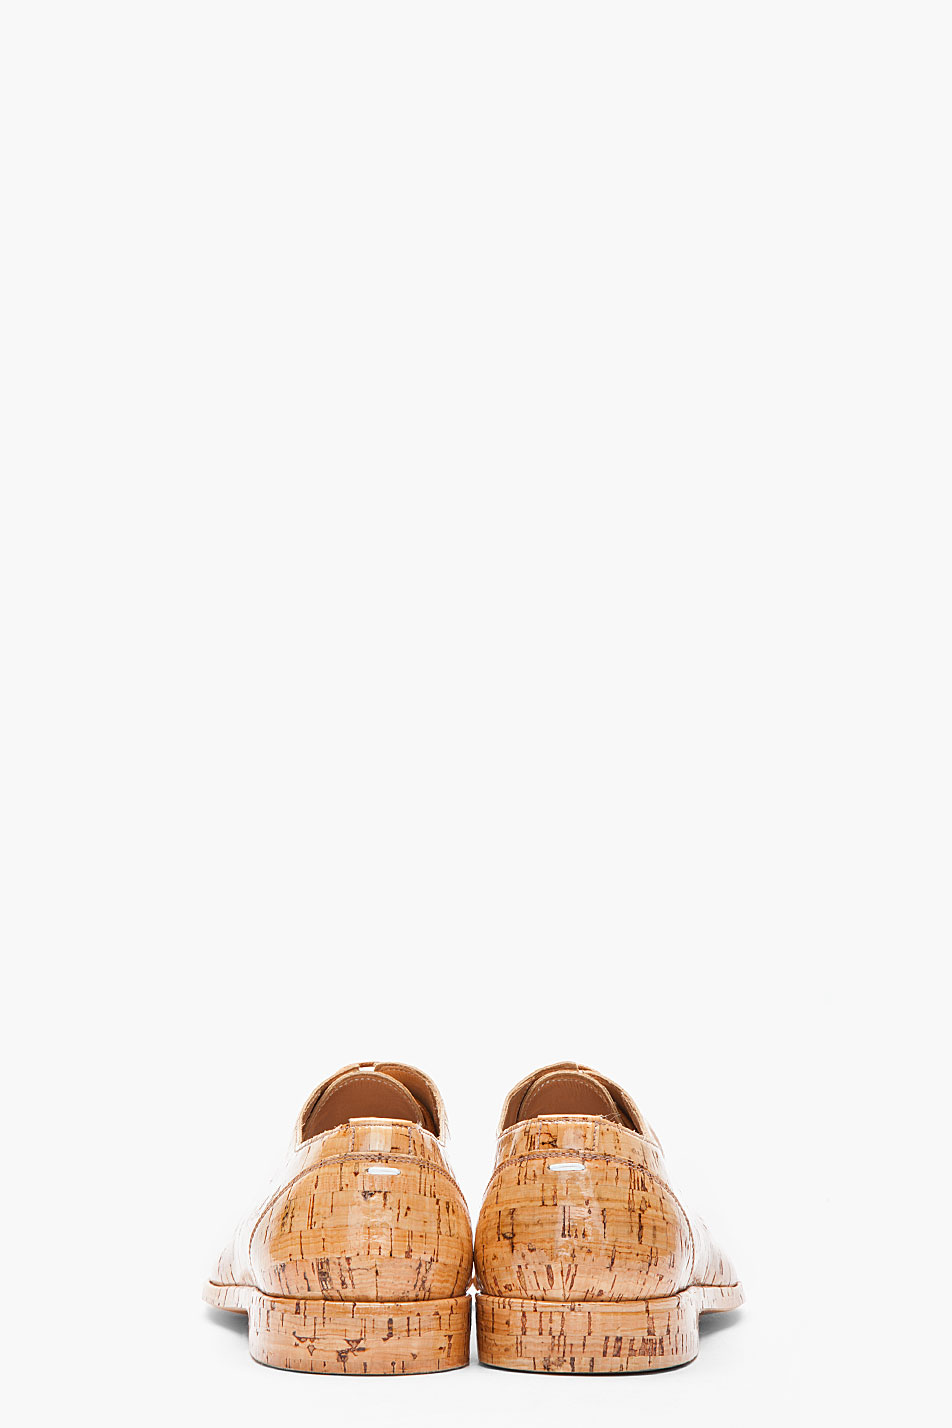 Maison Martin Margiela 'Tan Varnished Cork' Oxford Shoes - Made in Italy